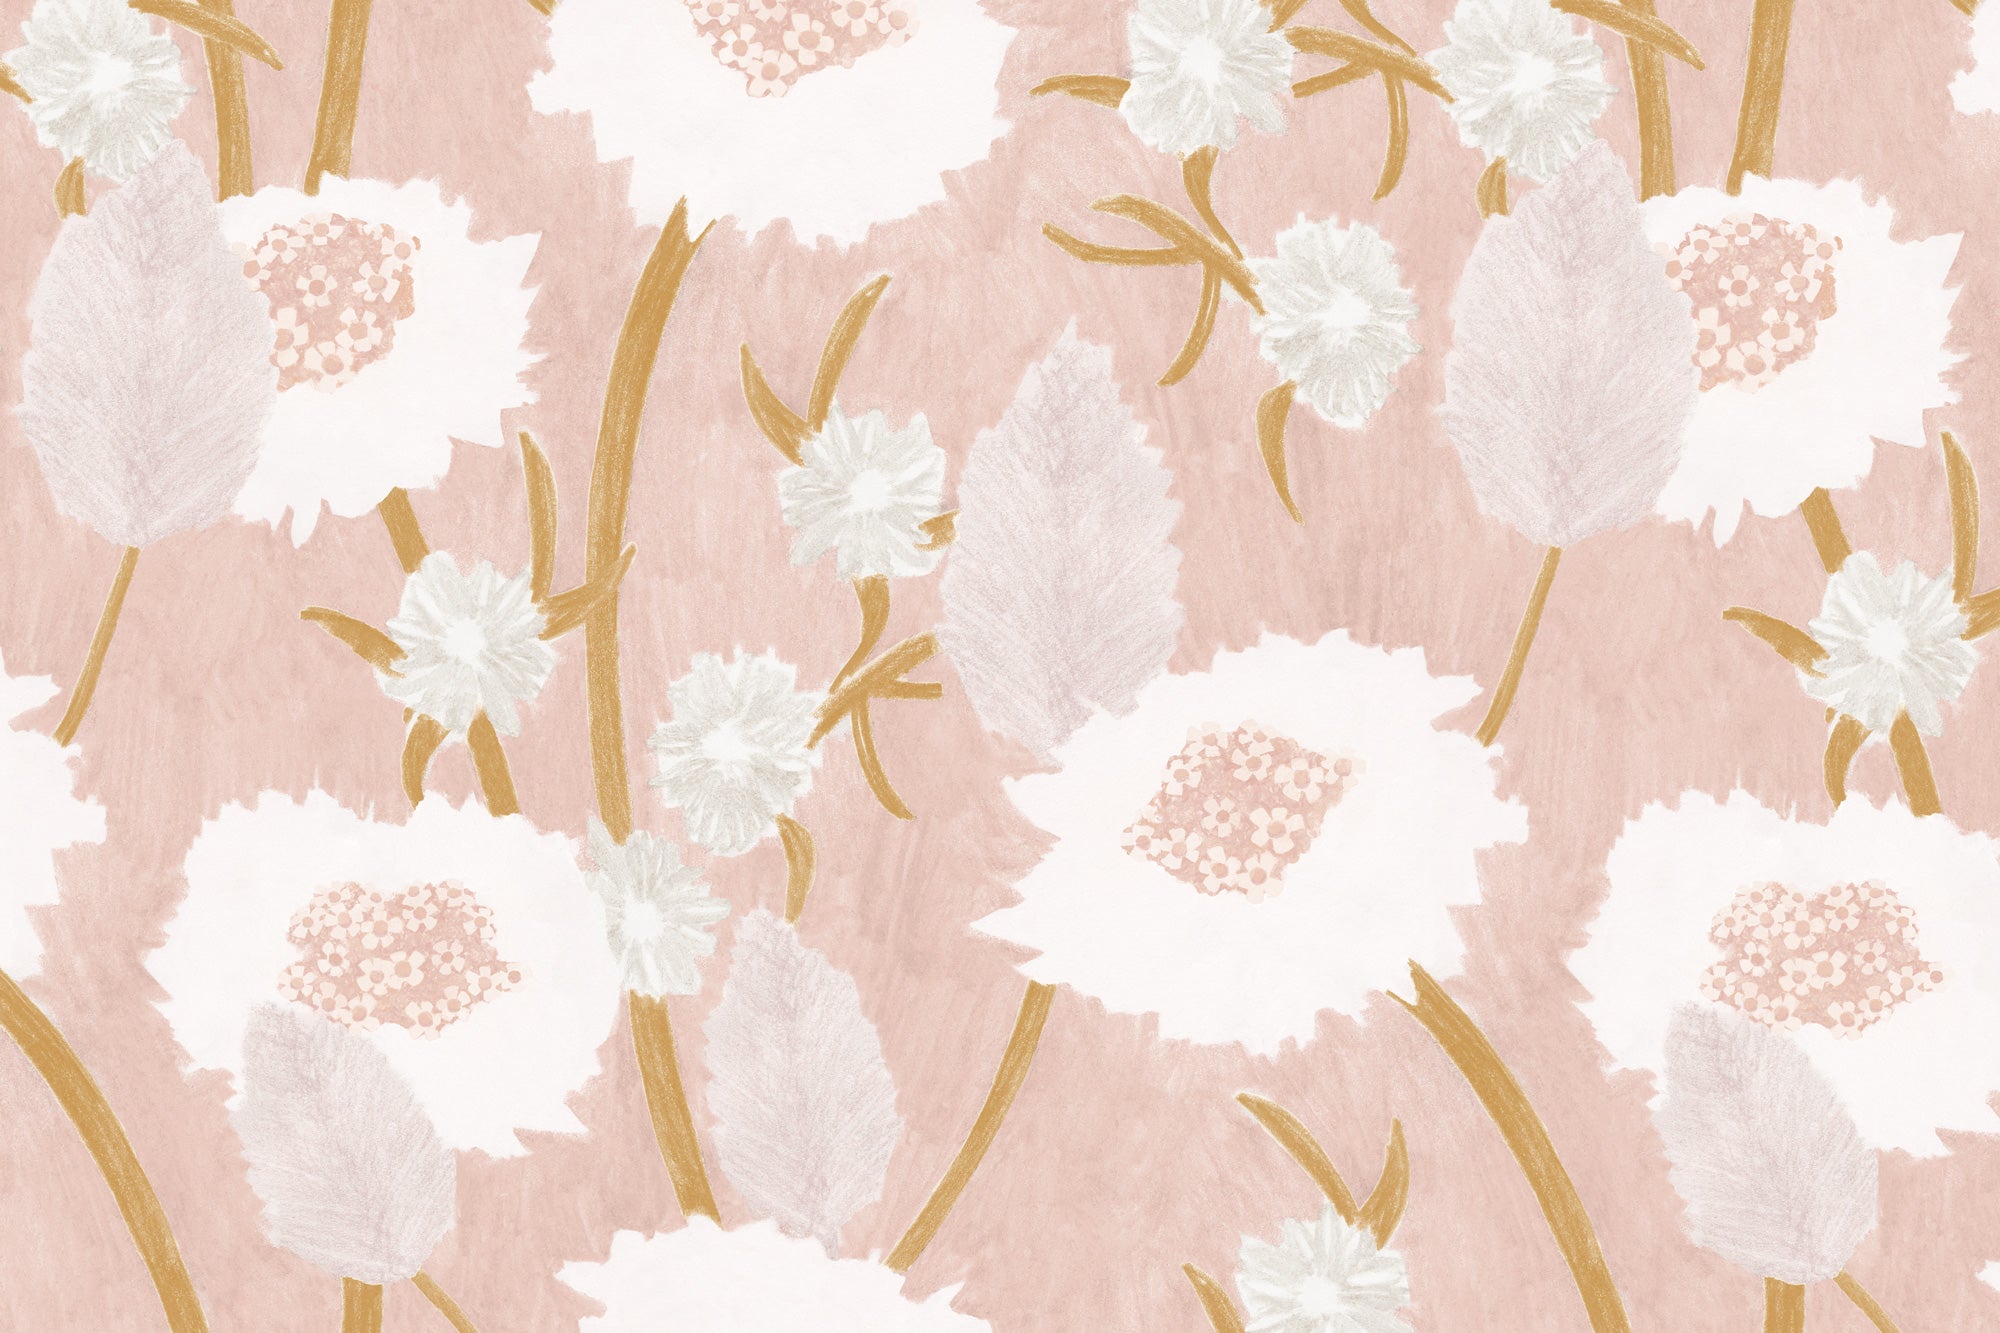 Detail of wallpaper in a playful floral print in shades of pink, white and tan on a light pink field.